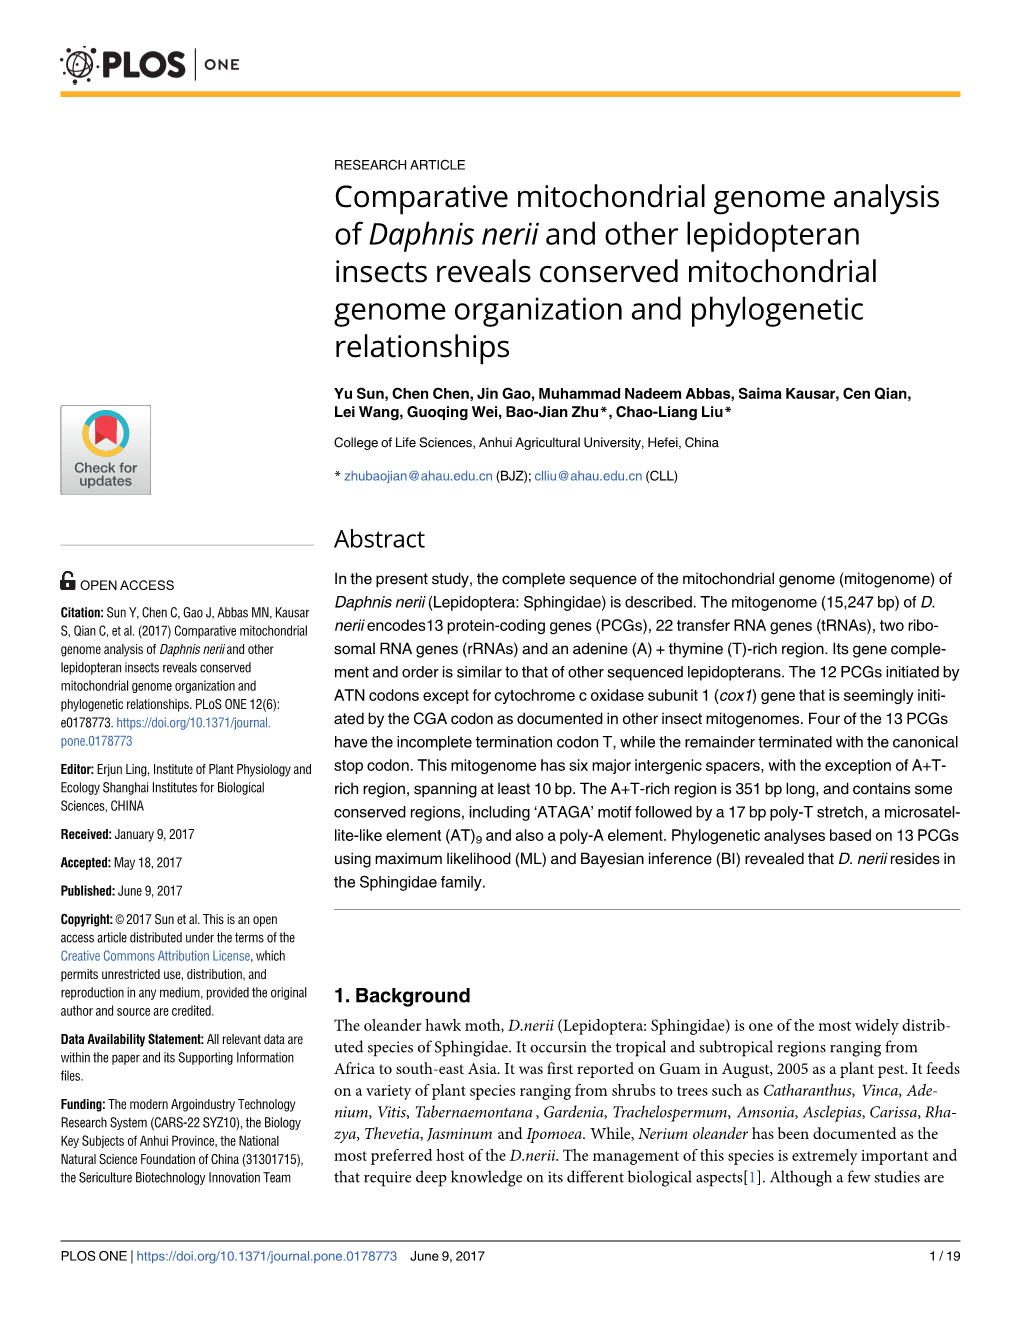 Comparative Mitochondrial Genome Analysis of Daphnis Nerii and Other